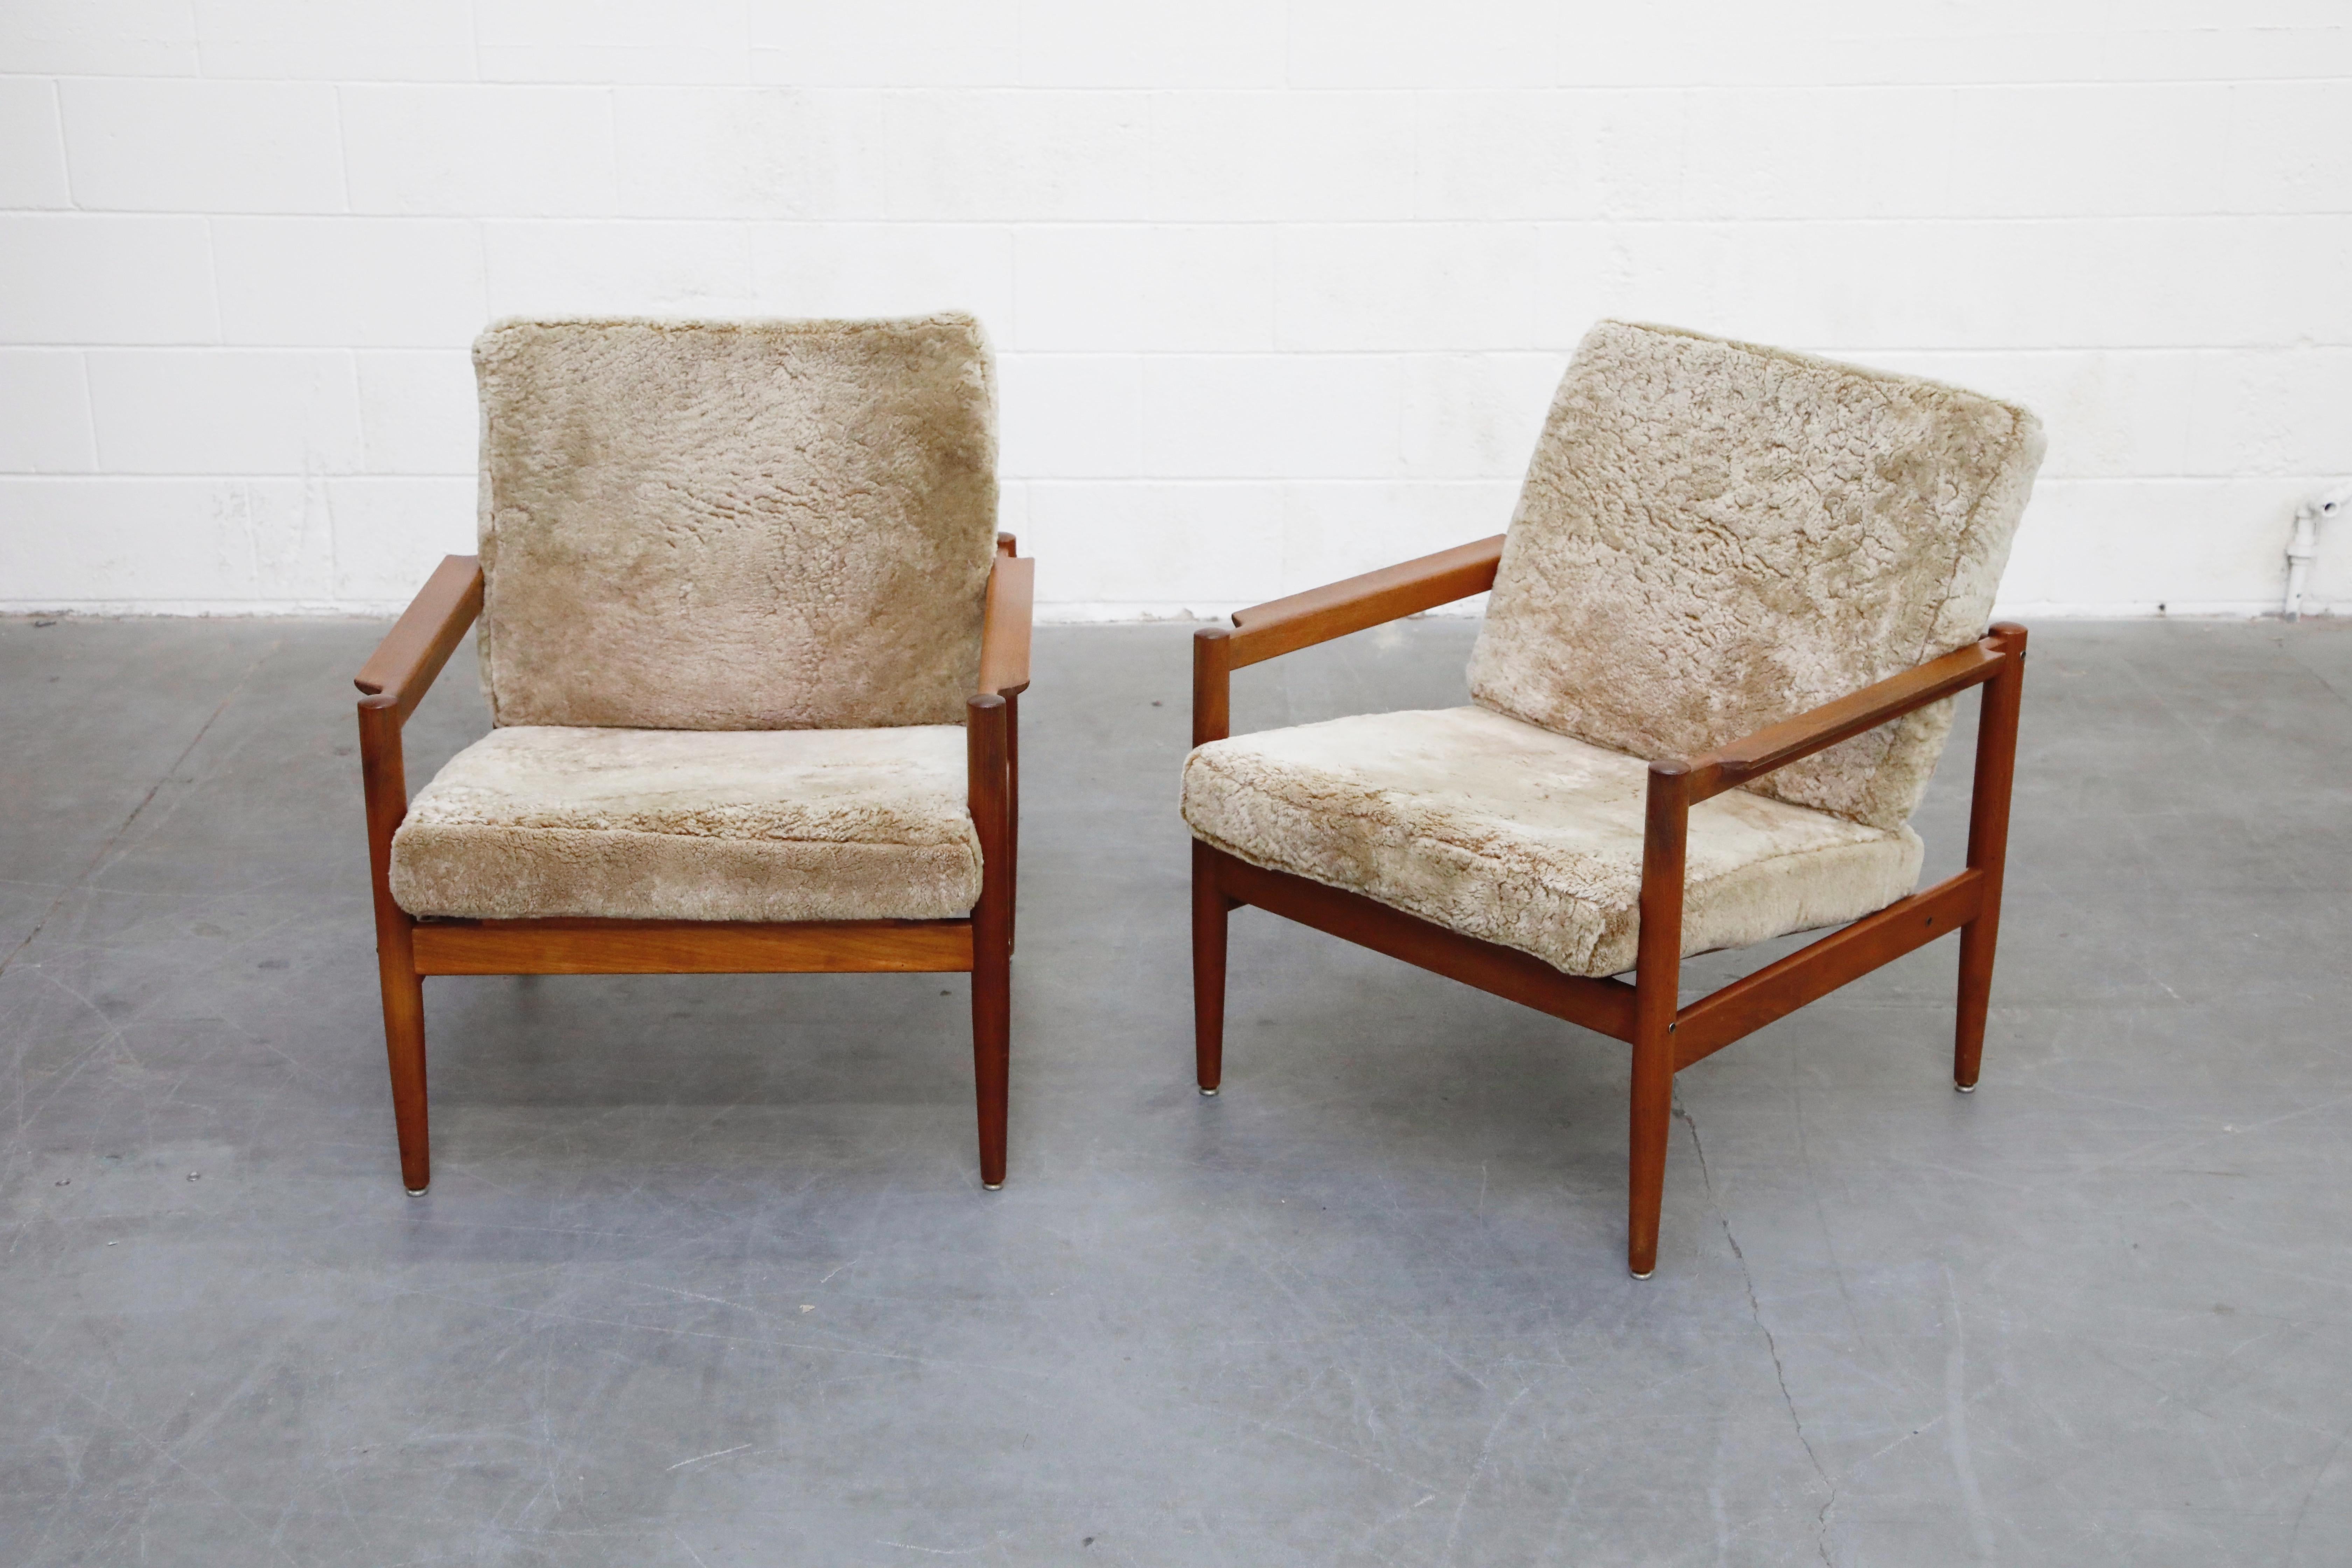 Danish Teak and Shearling Fur Lounge Chairs by Børge Jensen & Sønner, 1960s, Signed